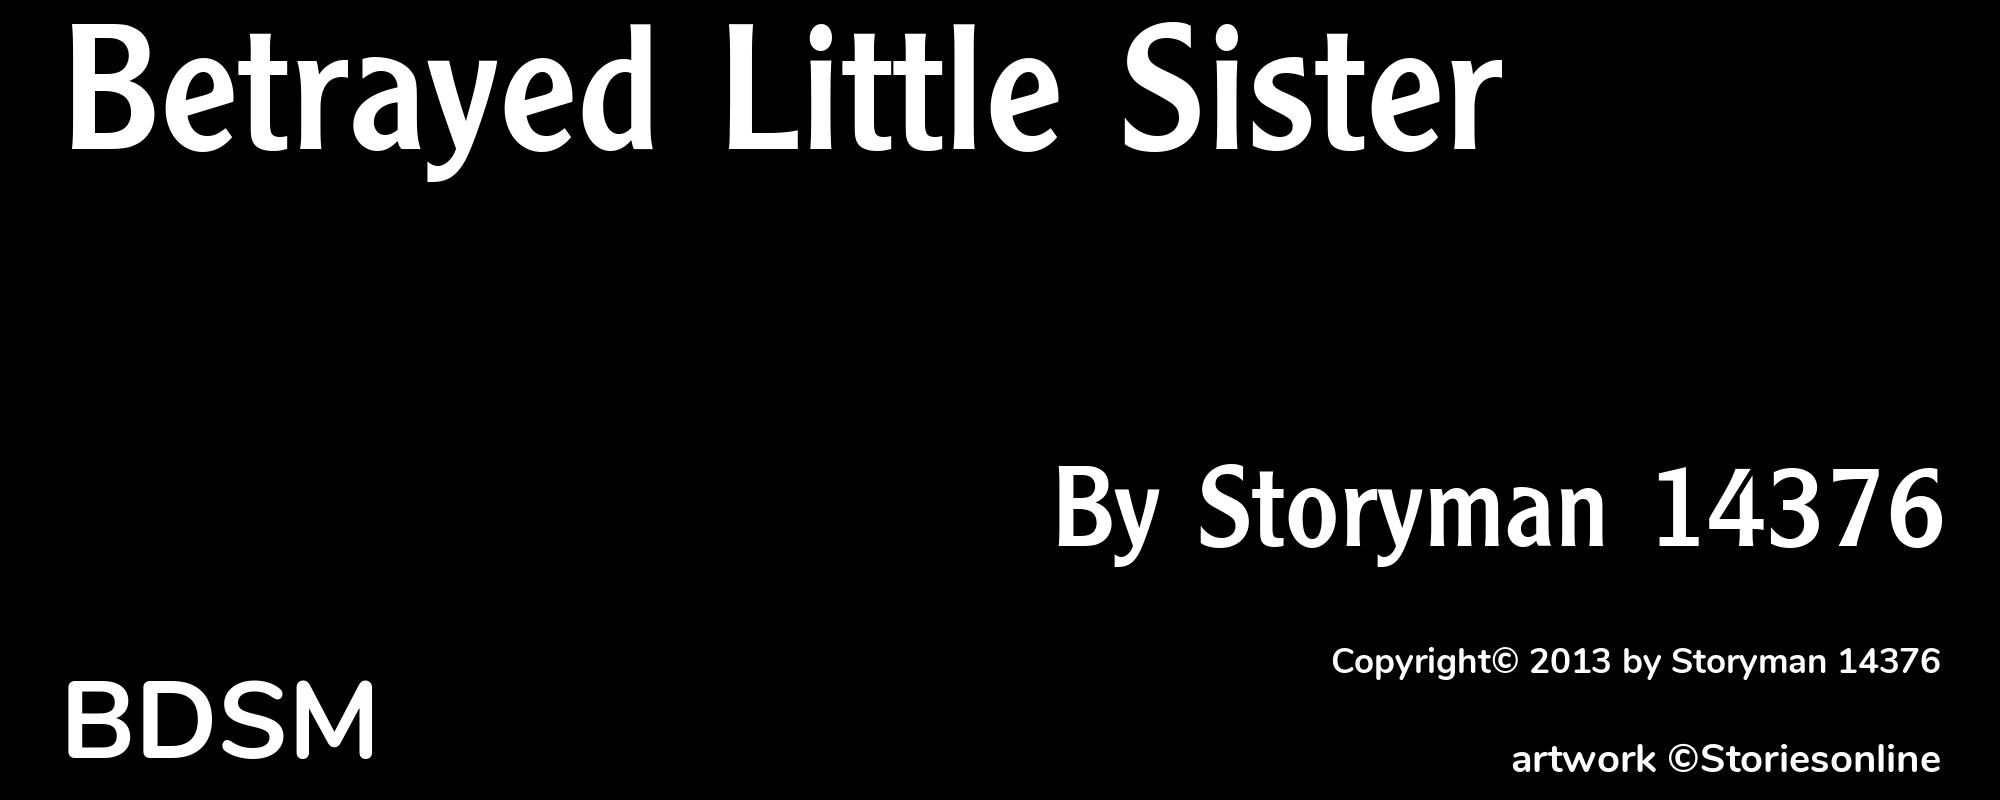 Betrayed Little Sister - Cover